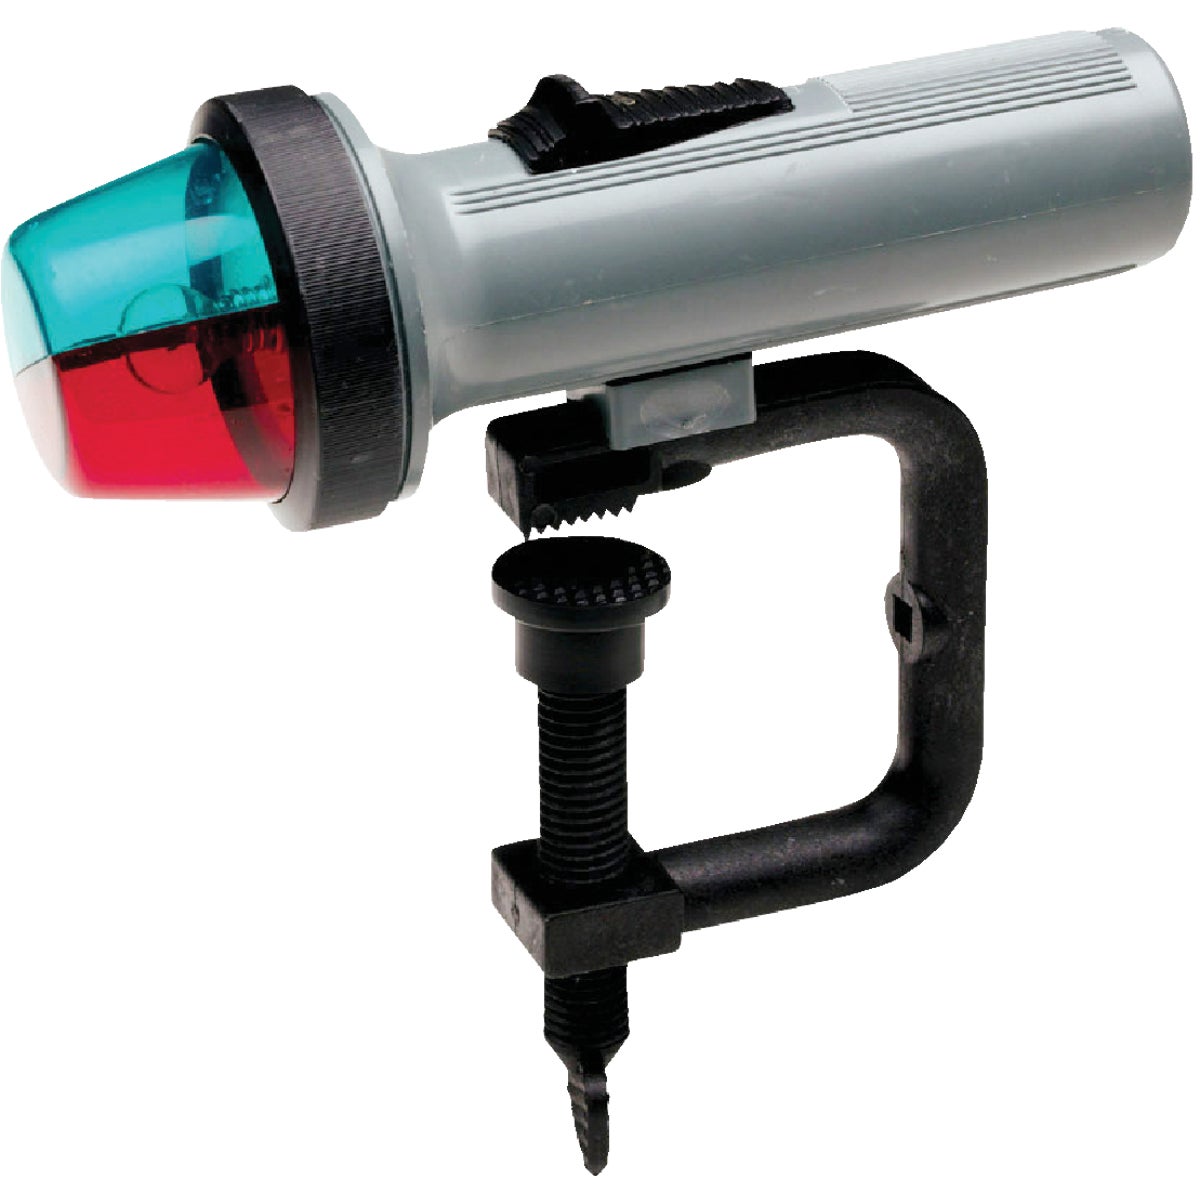 Item 585793, Red and green light with aluminum adjustable clamp for horizontal surfaces